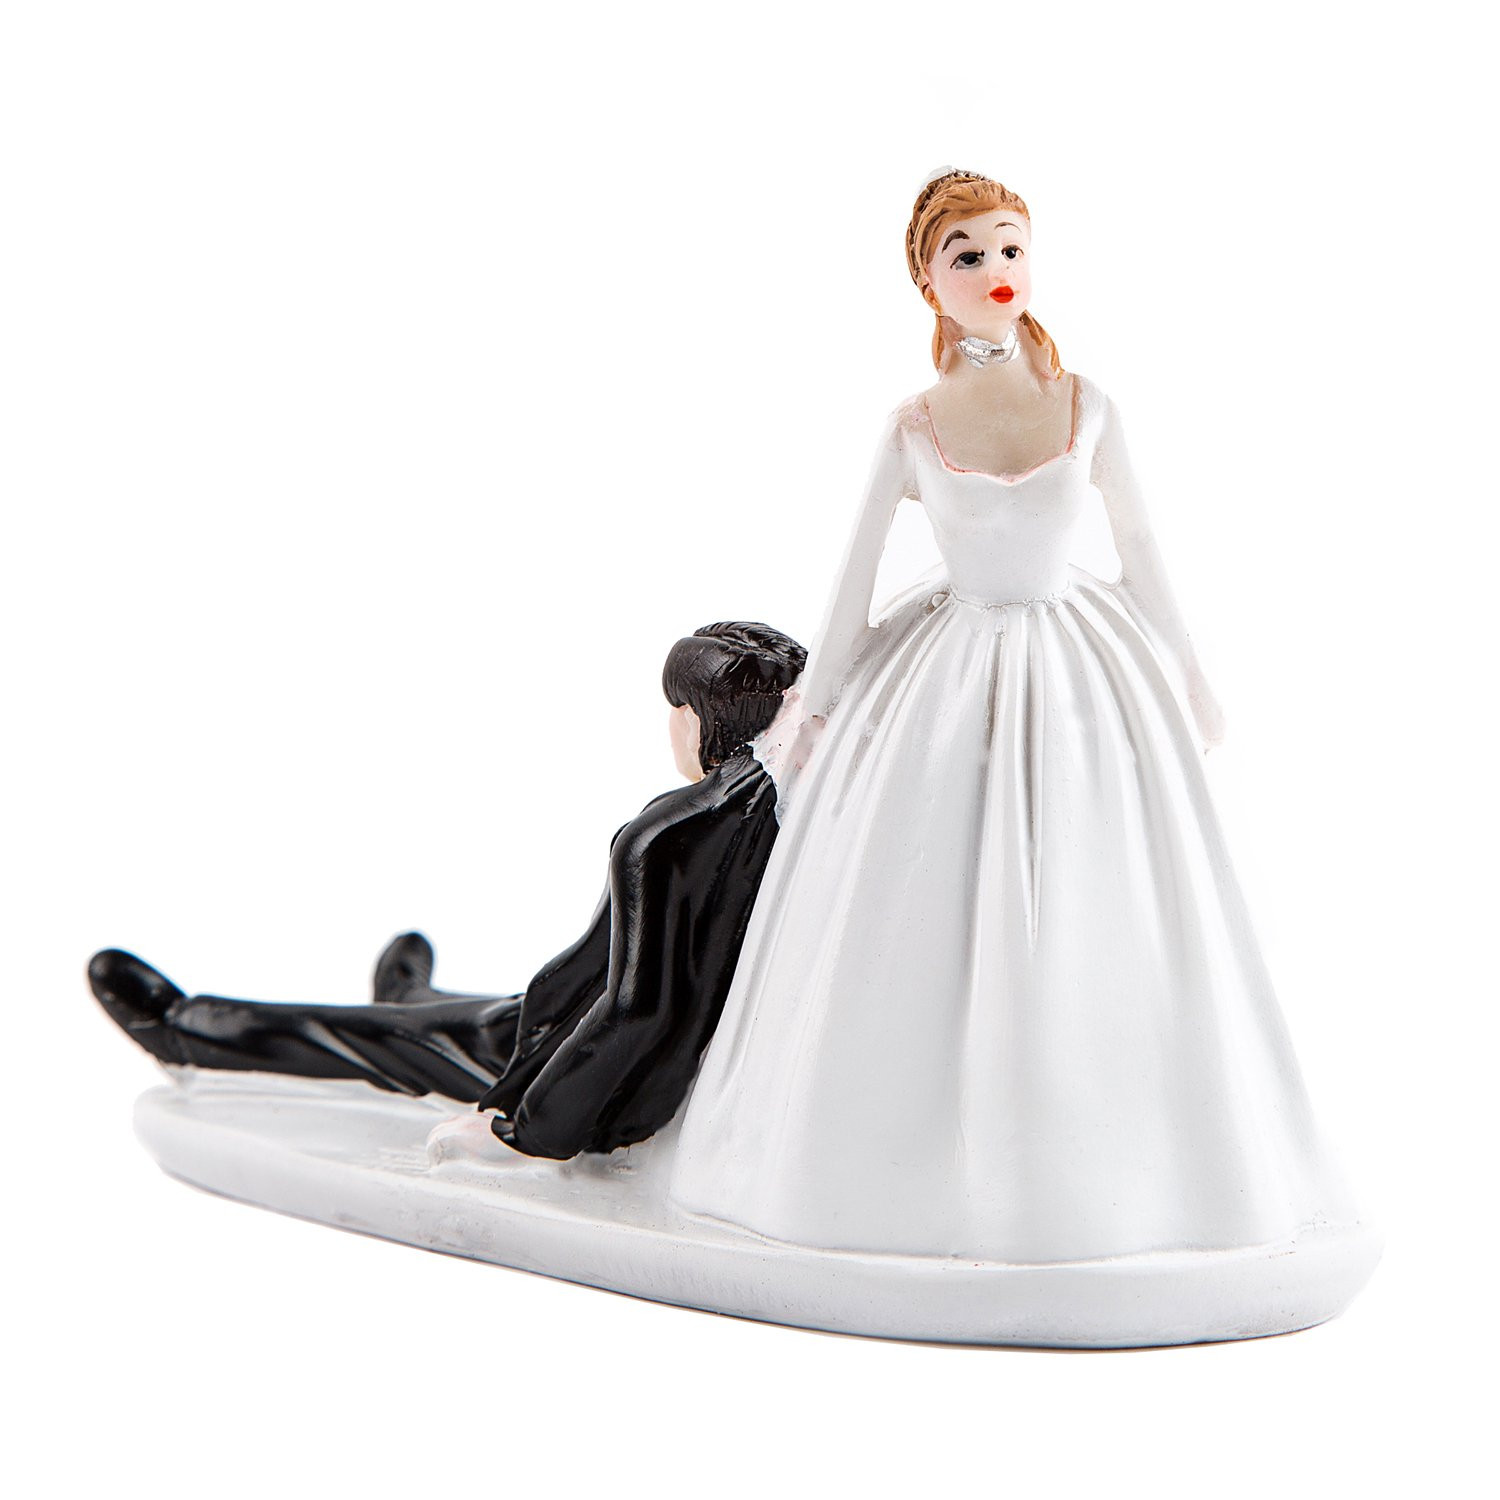 Wedding Cake Toppers Bride And Groom
 Bride and Groom Wedding Cake Topper Funny The Mad in